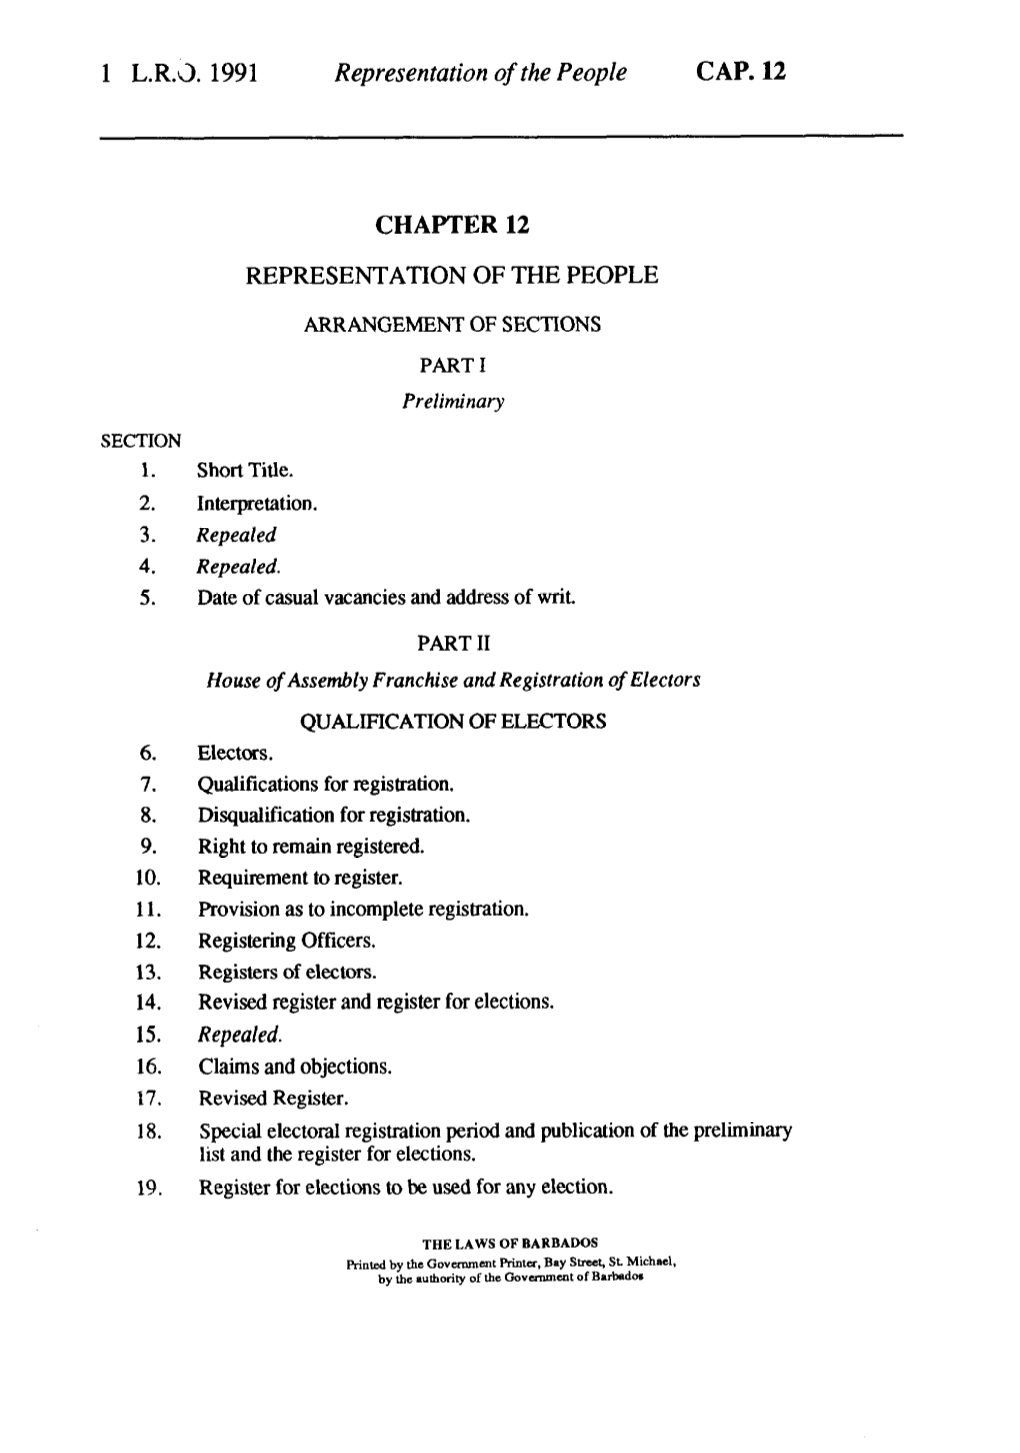 Representation of the People Act (2007, Cap